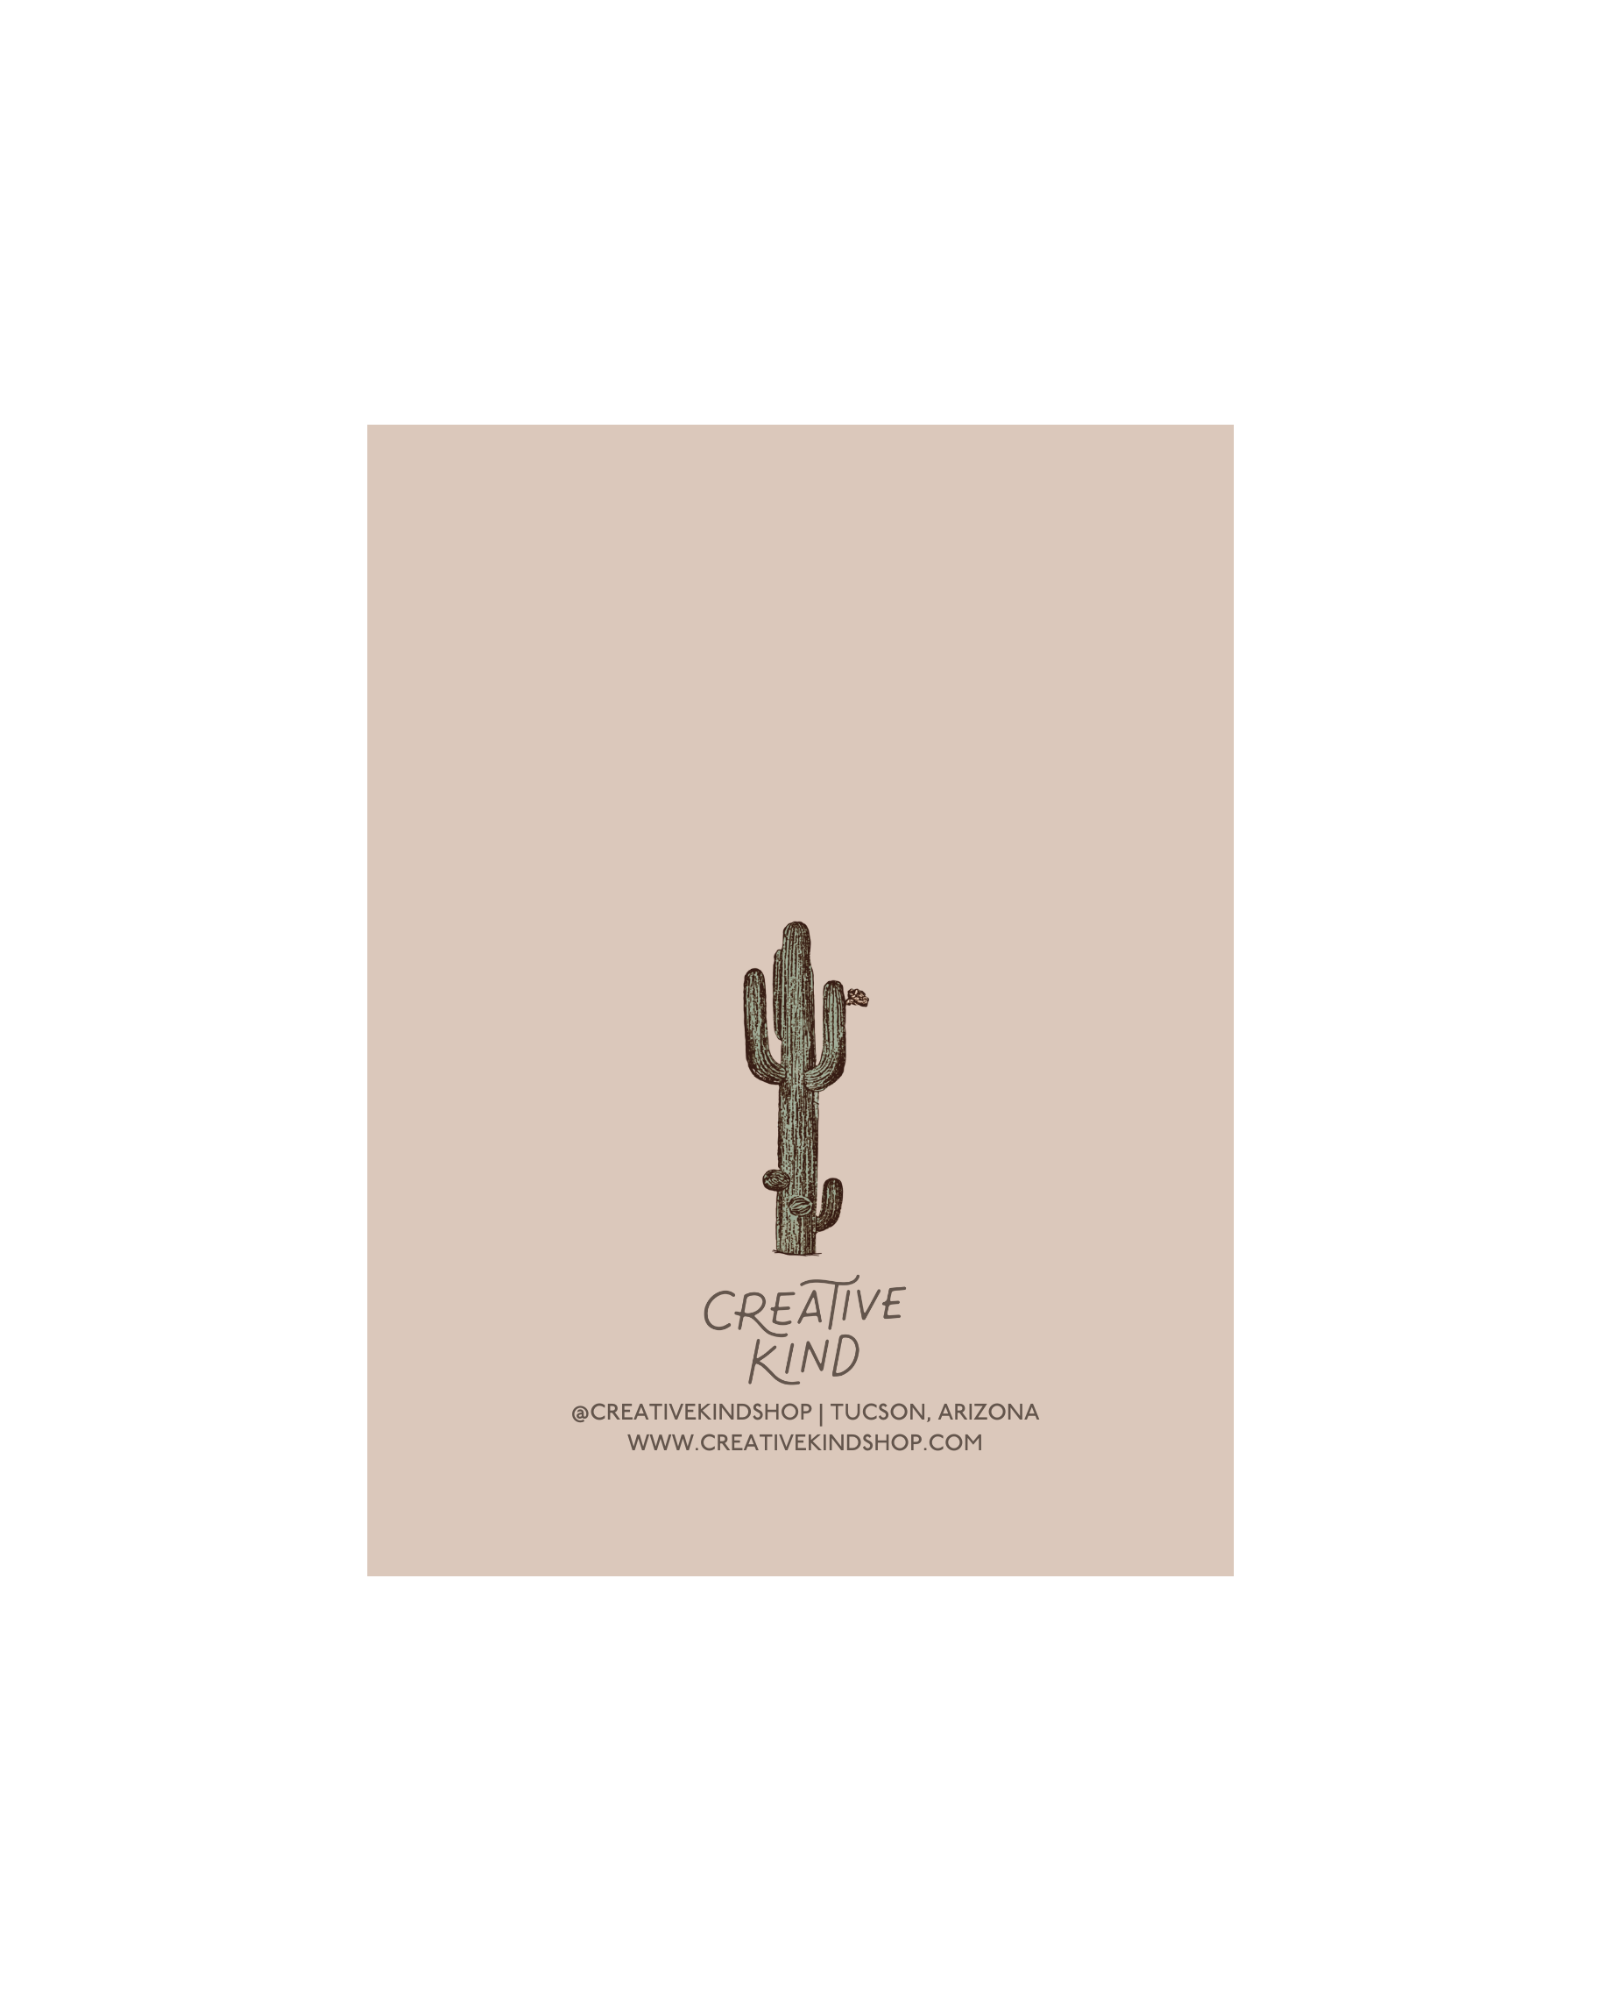 Back of greeting card with cactus illustration above creative kind logo